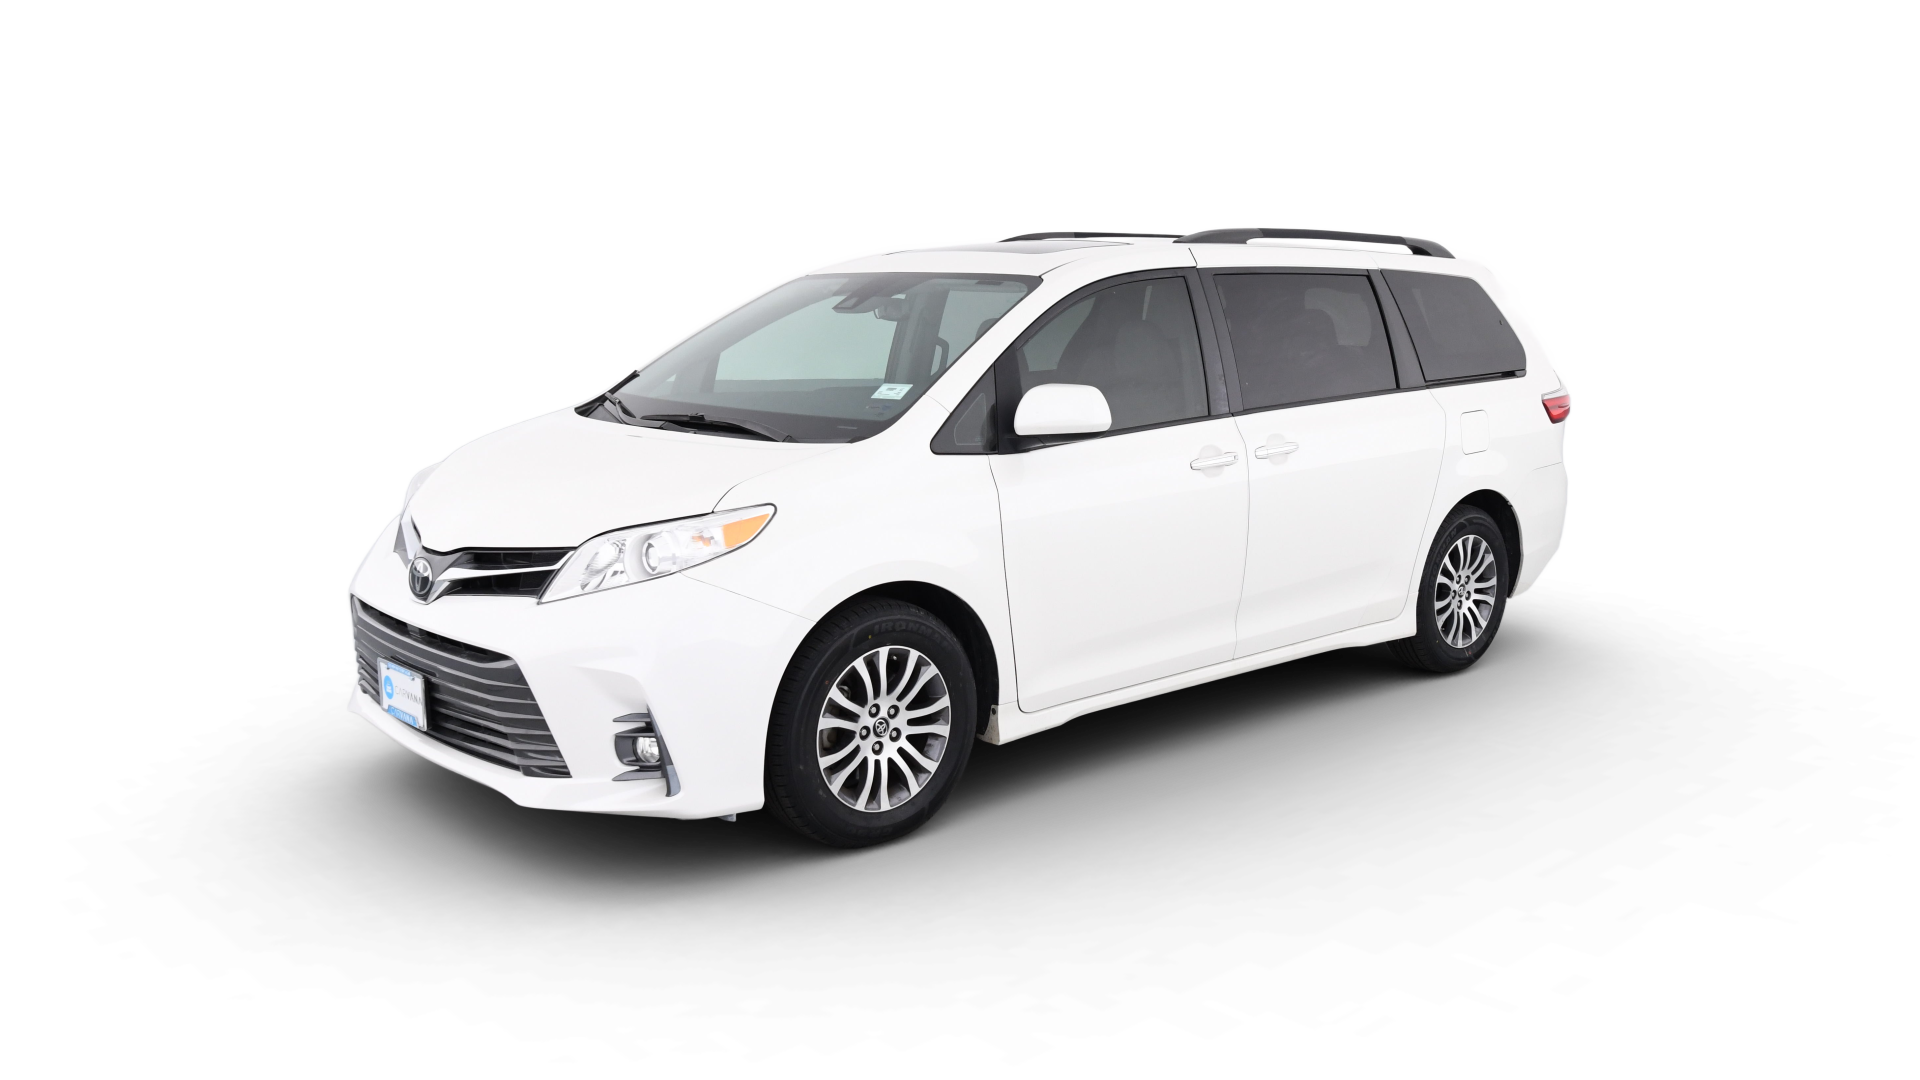 Used 2018 Toyota Sienna For Sale Online | Carvana